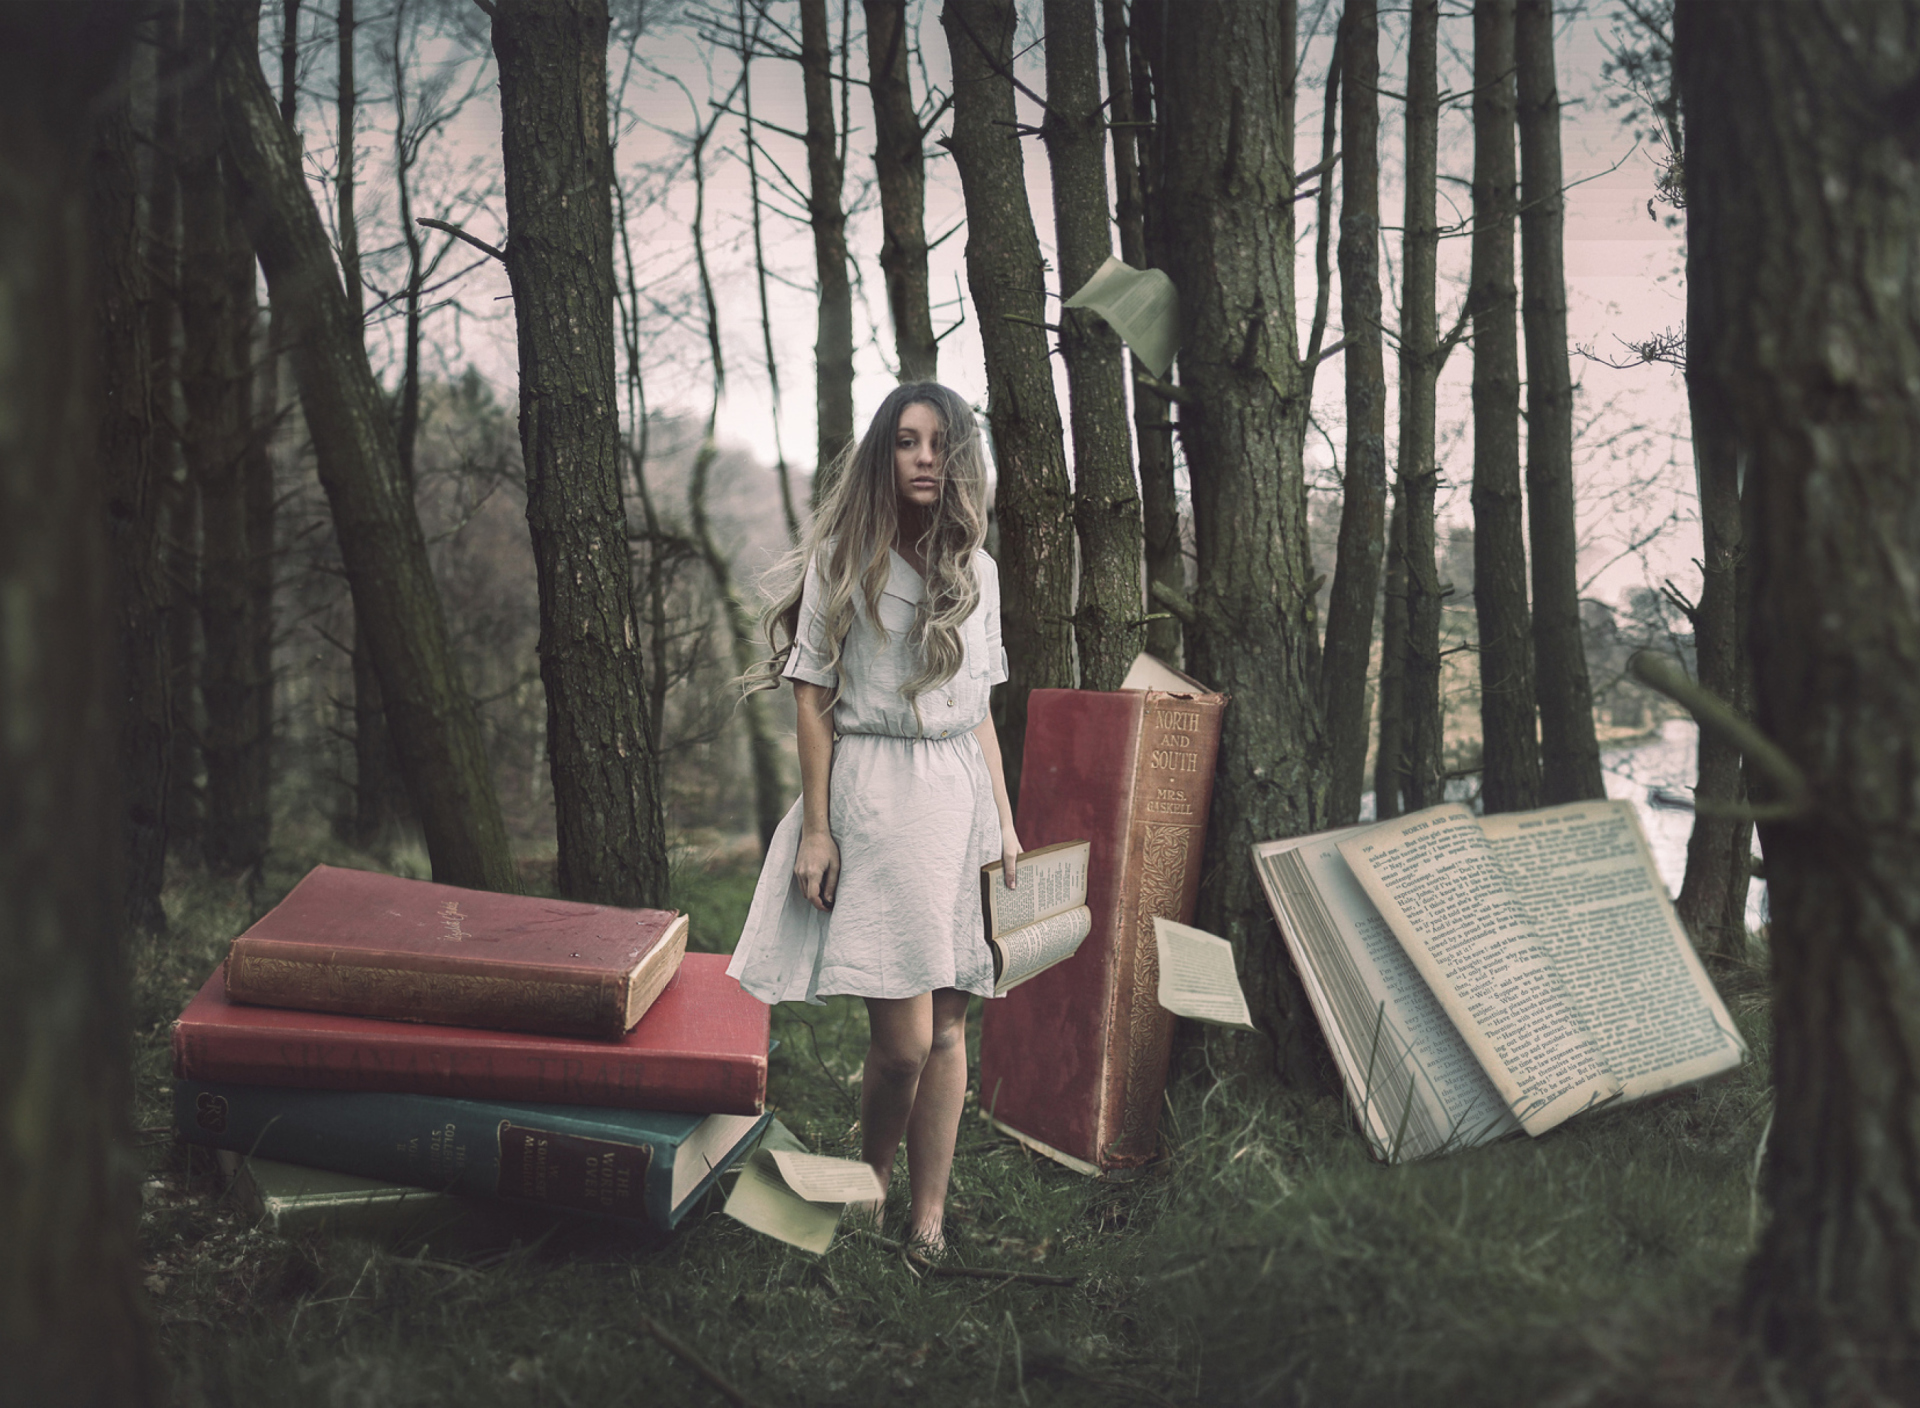 Forest Nymph Surrounded By Books screenshot #1 1920x1408